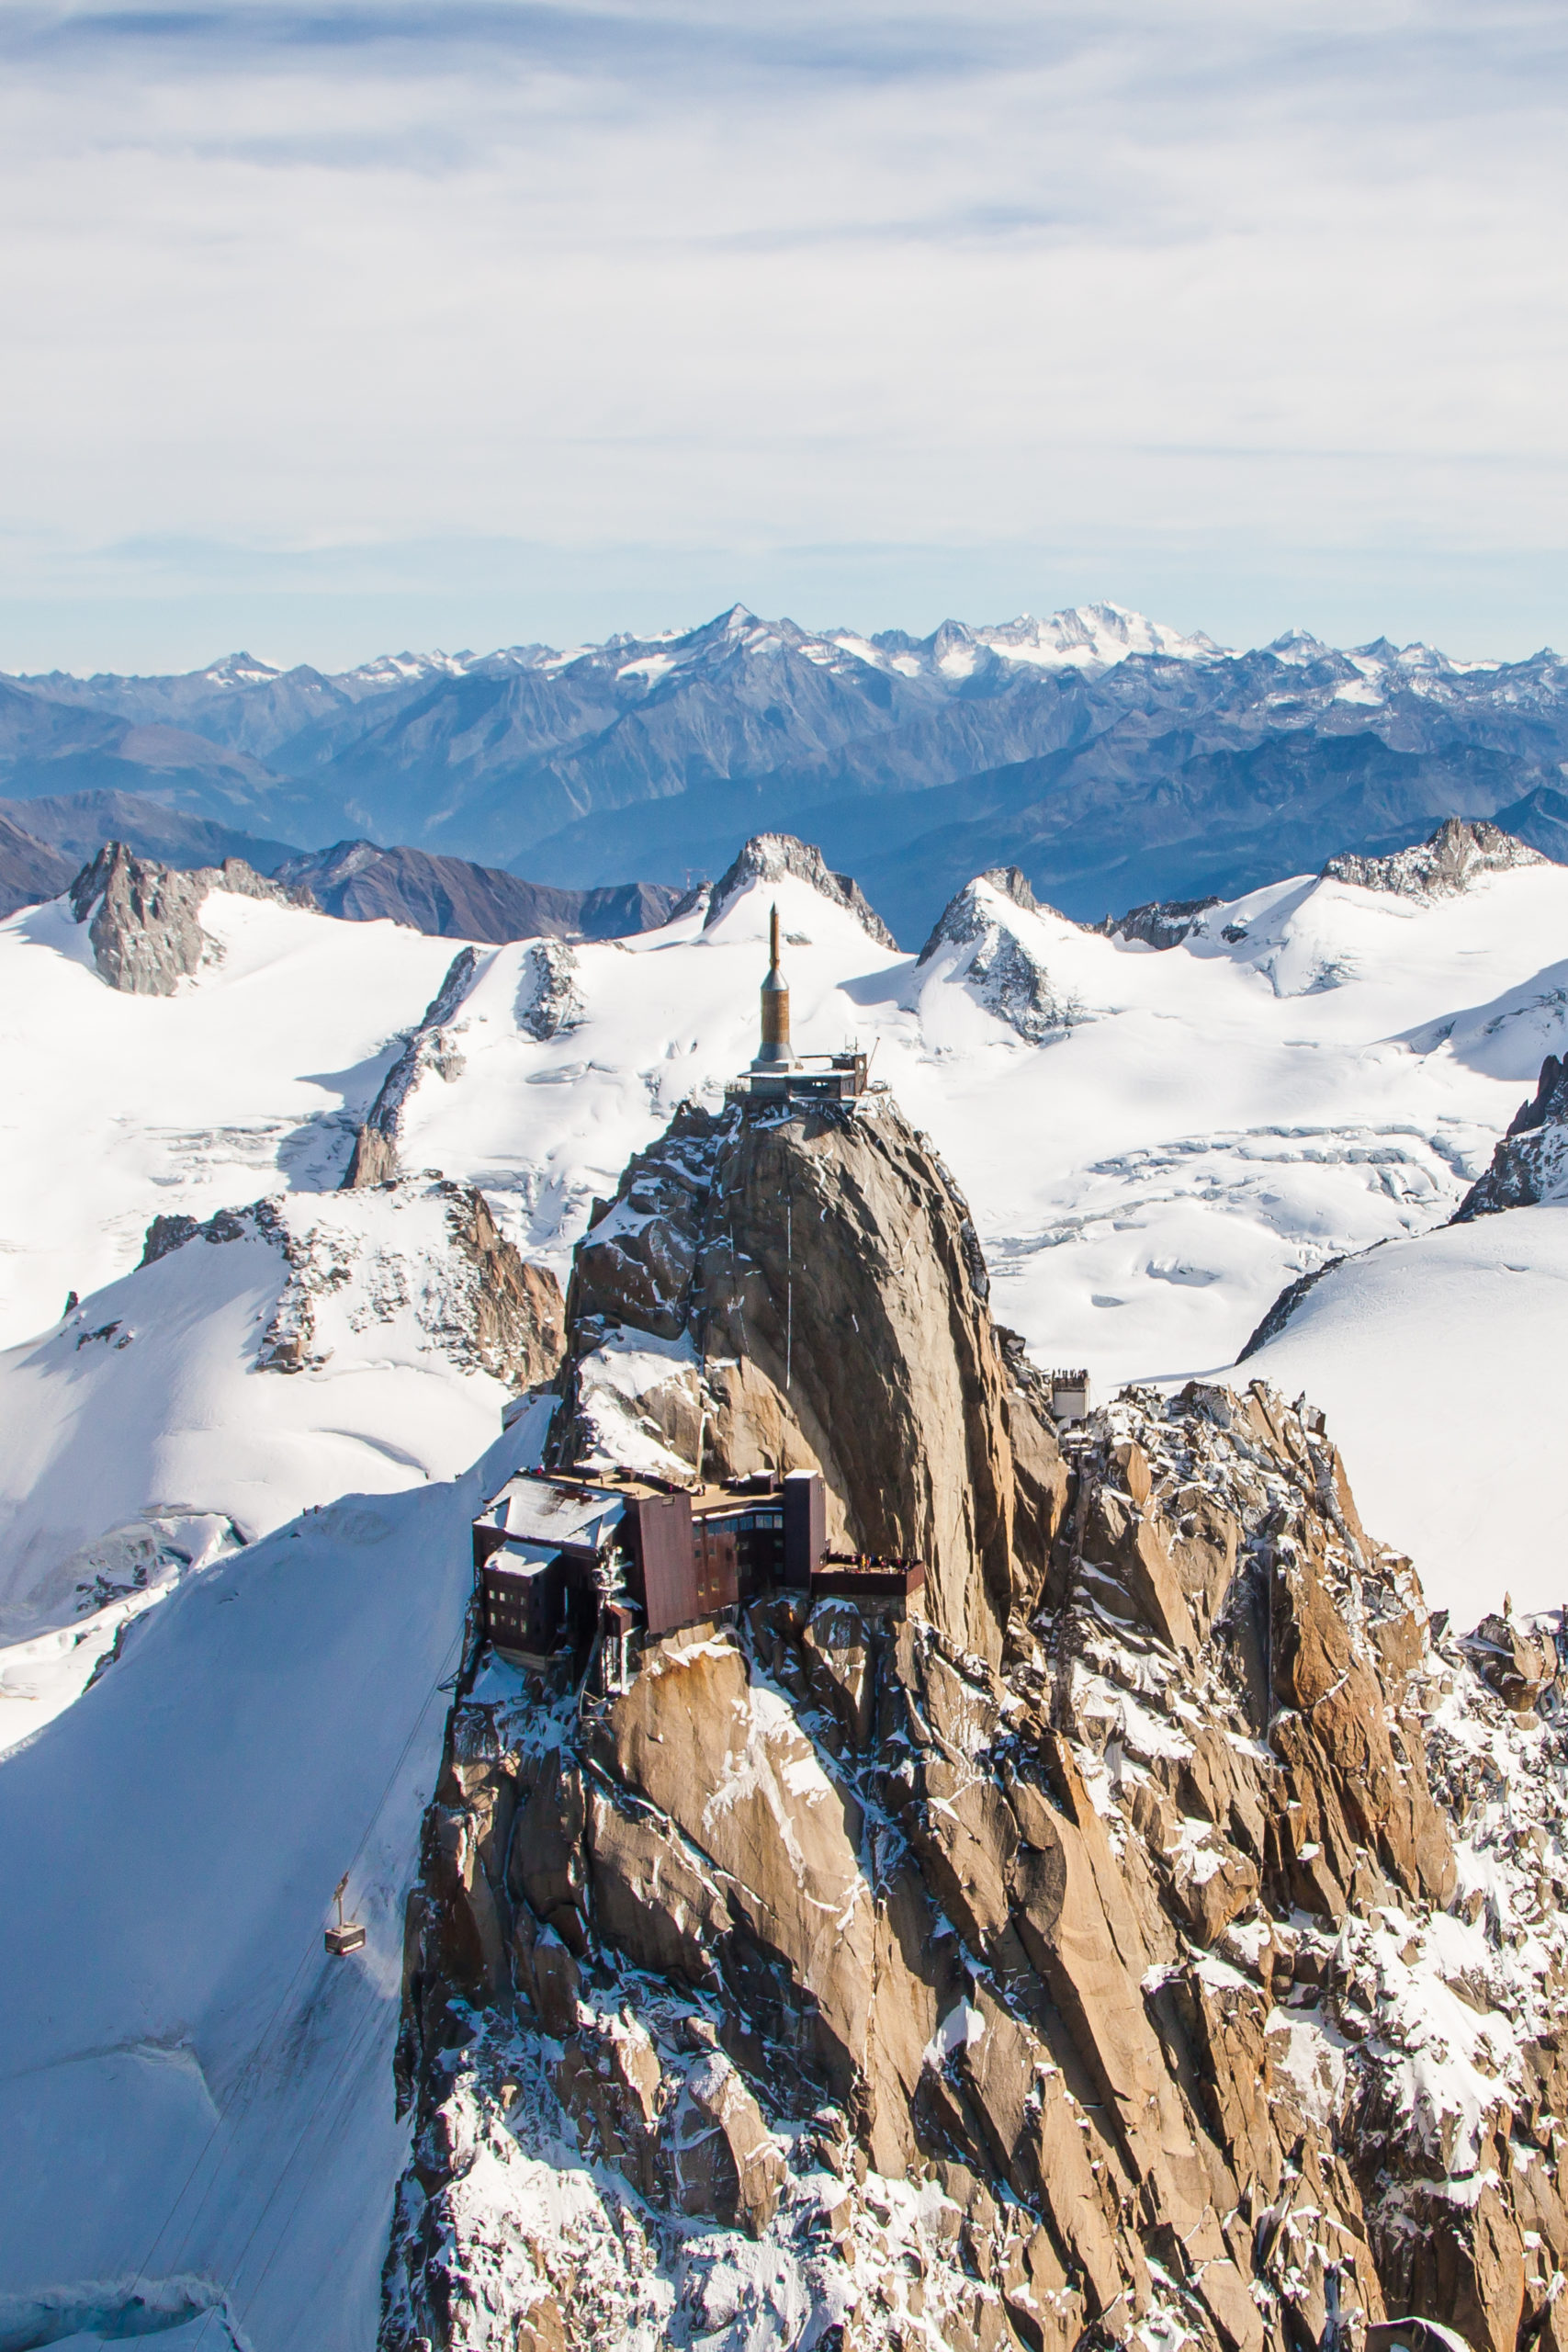 Altitude View of the Aiguille du Midi and the Snowy Alps Moutains Chain